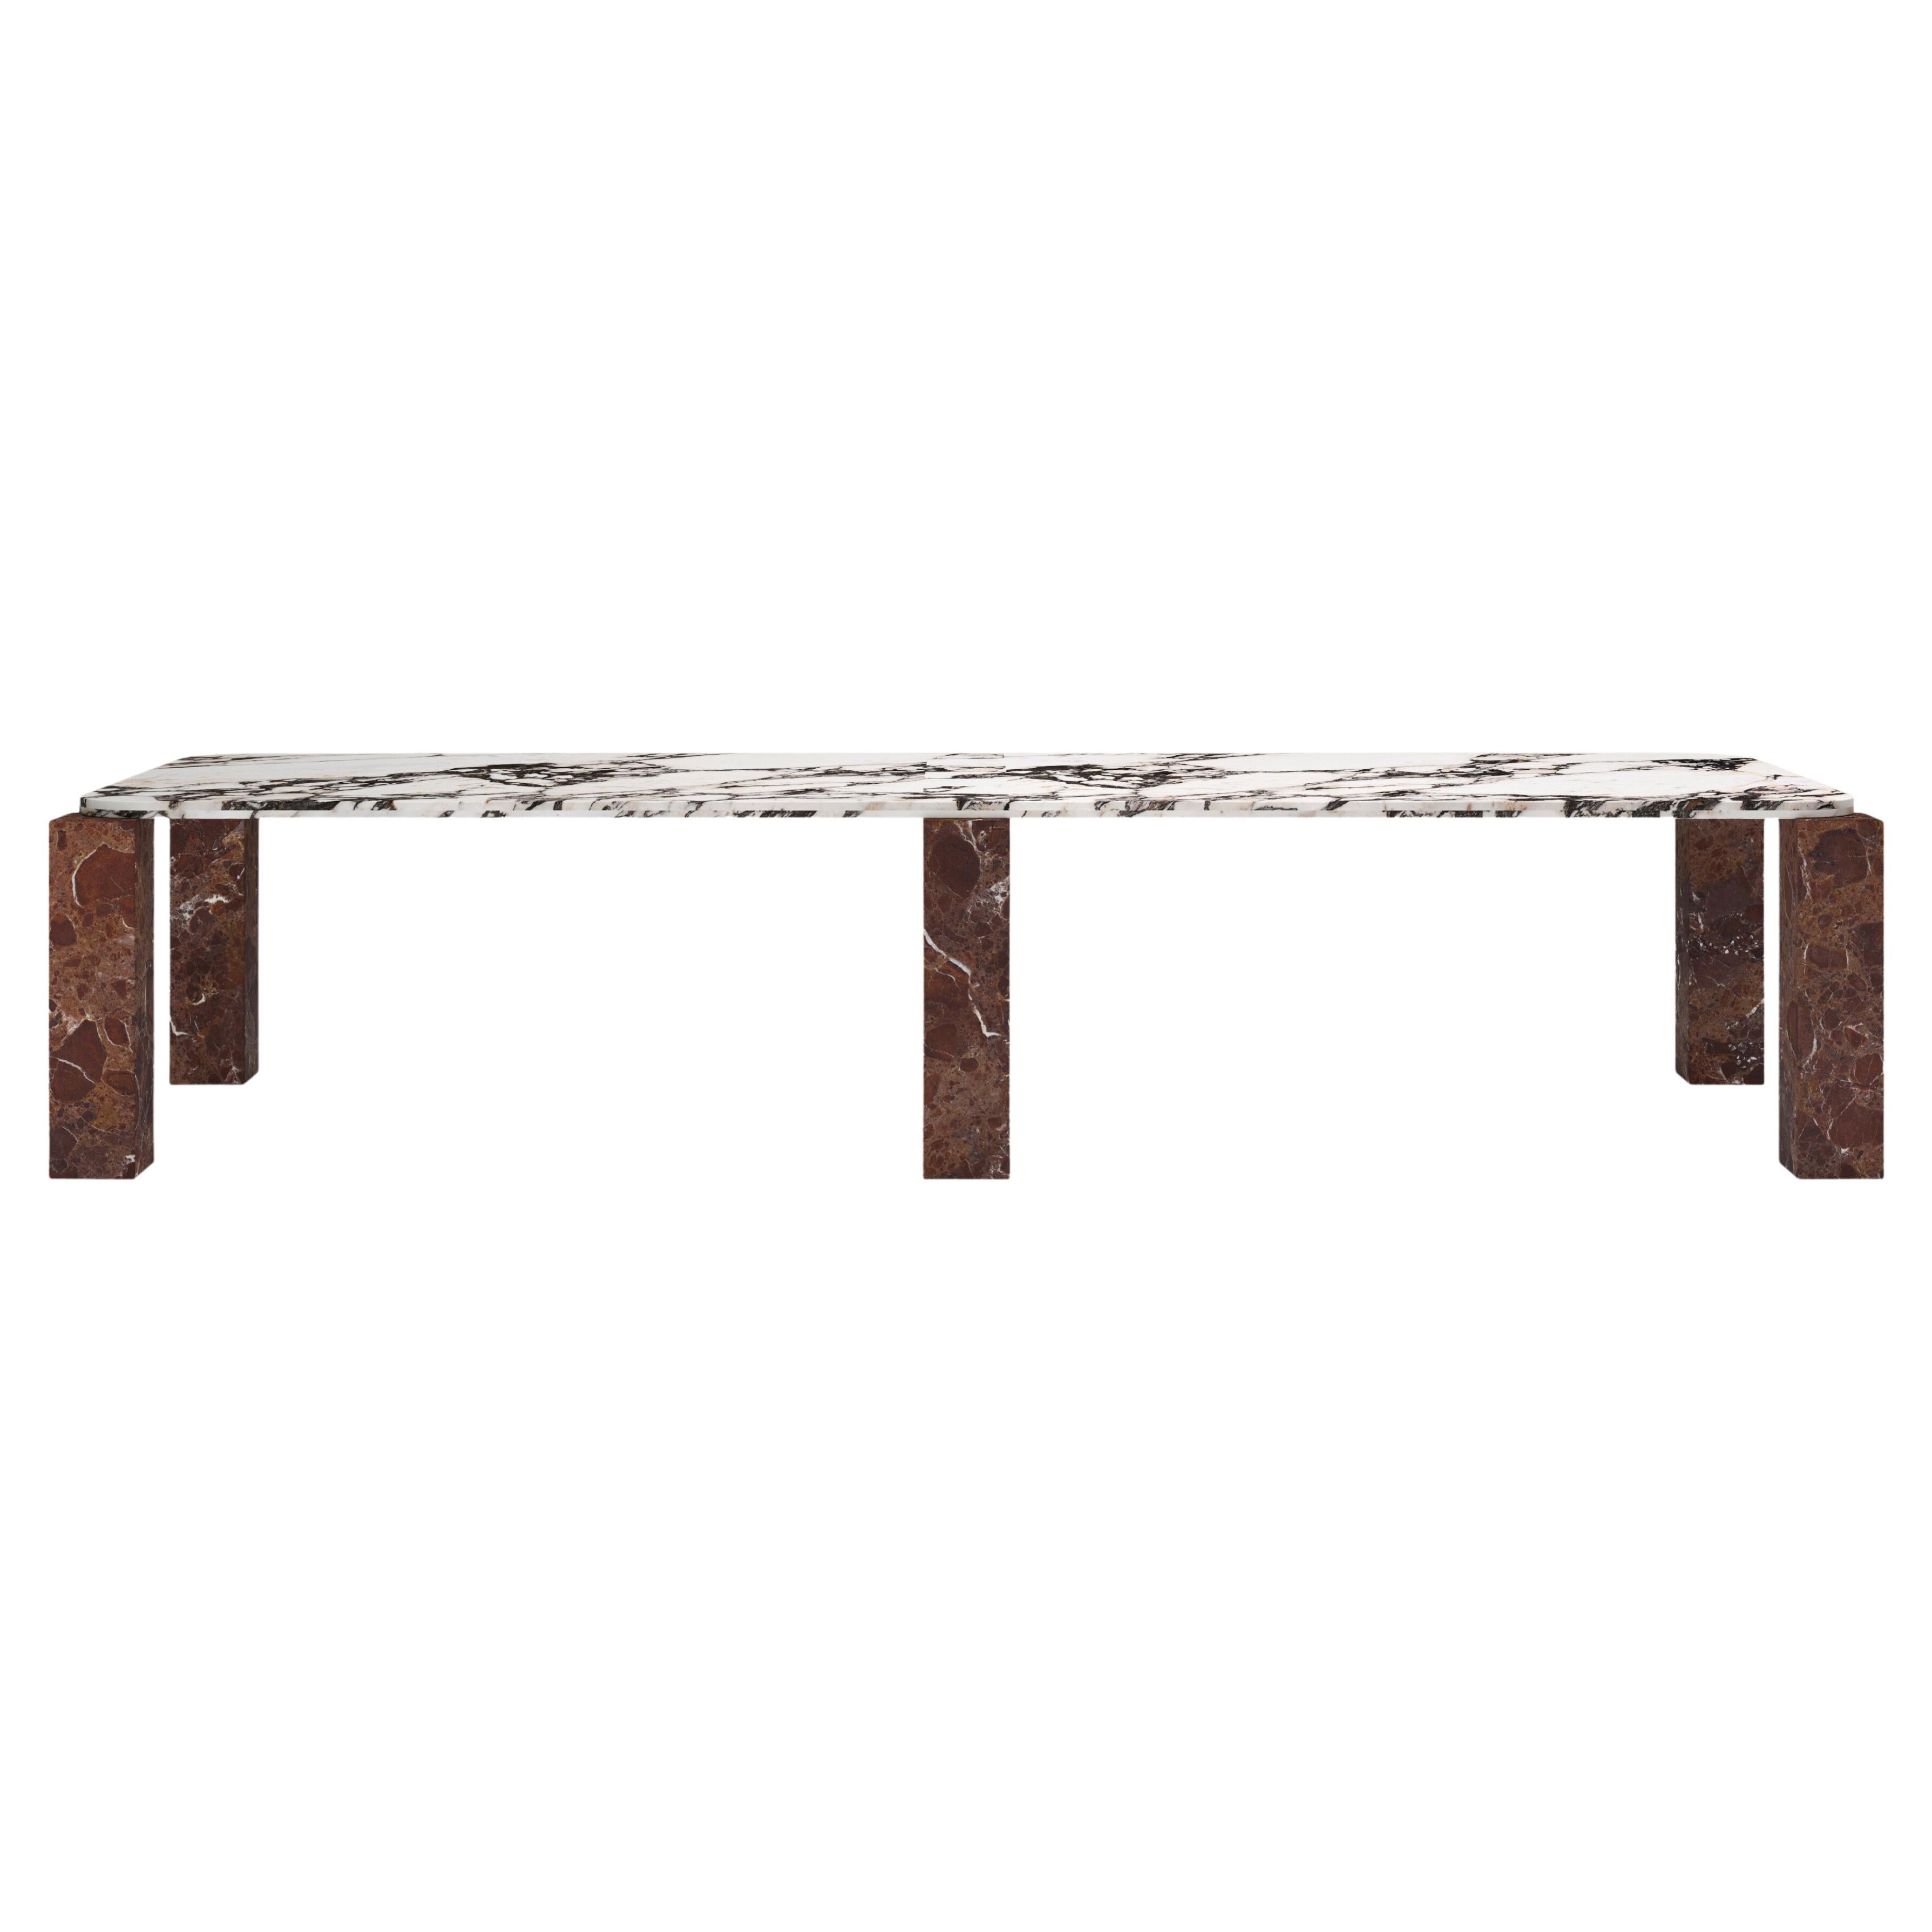 FORM(LA) Cubo Rectangle Dining Table 146”L x 50”W x 30”H Viola & Rosso Marble